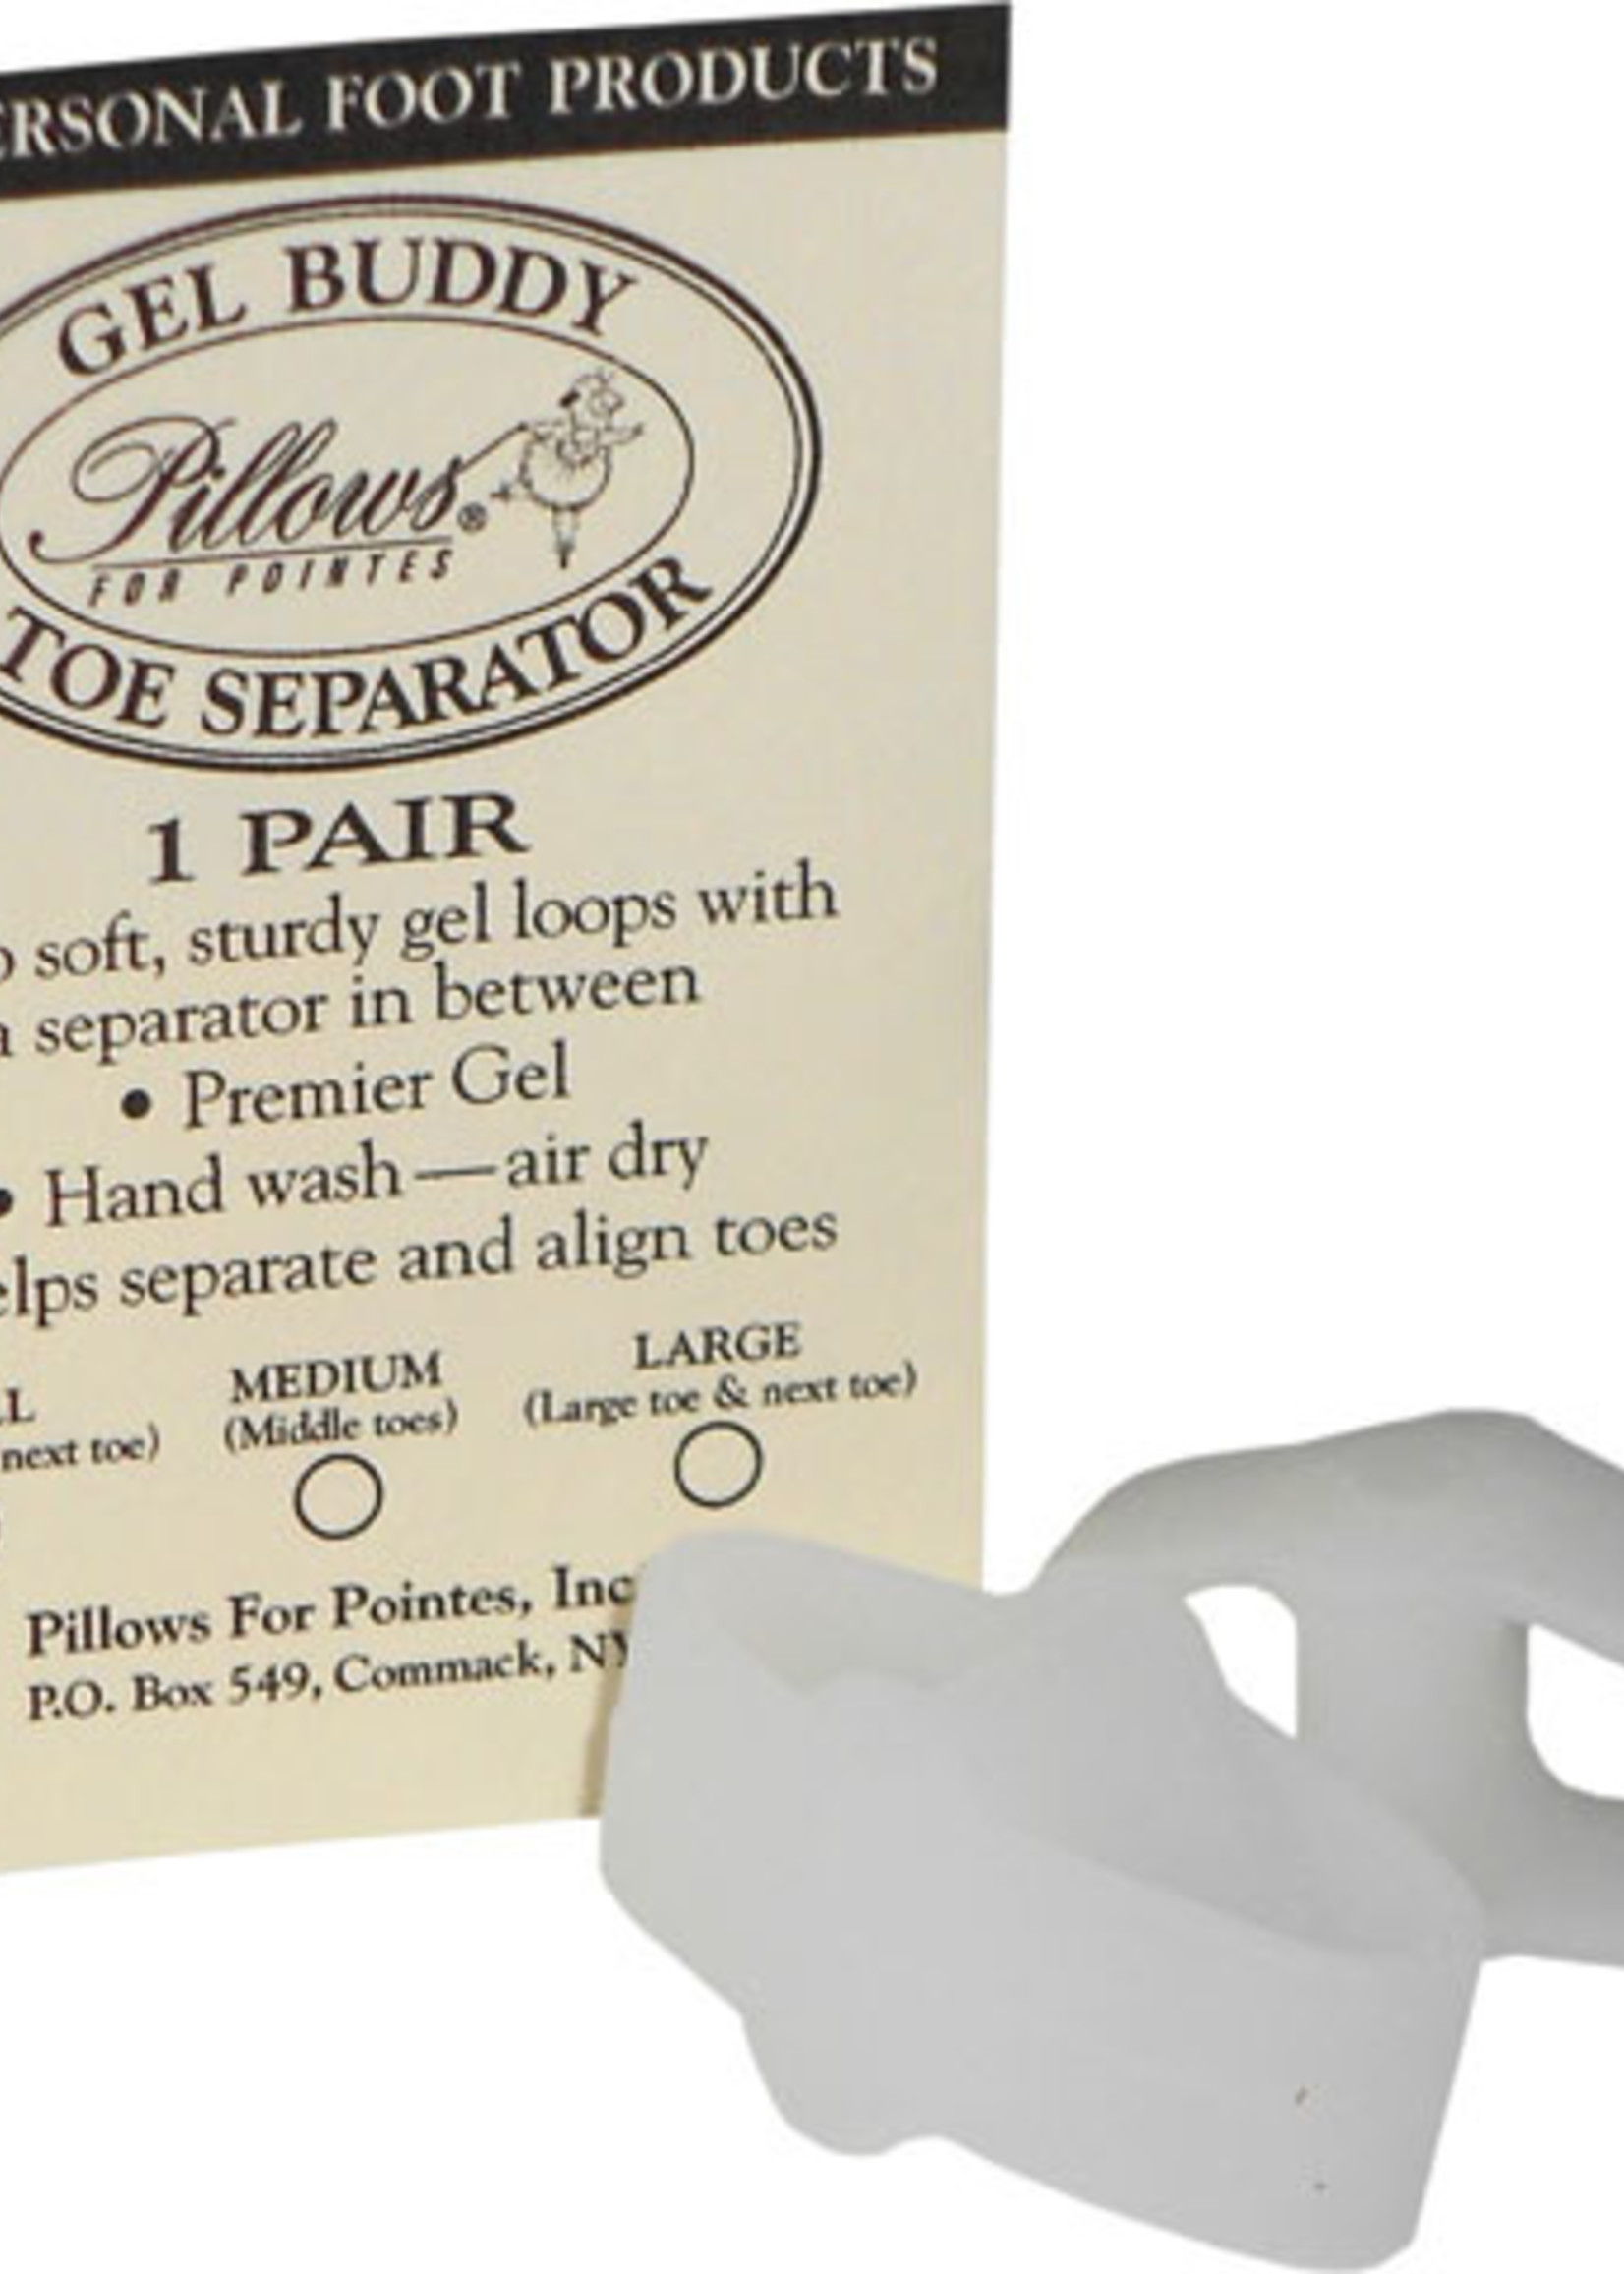 Pillows for Pointe Pillows for Pointe Gel Buddy Toe Separator